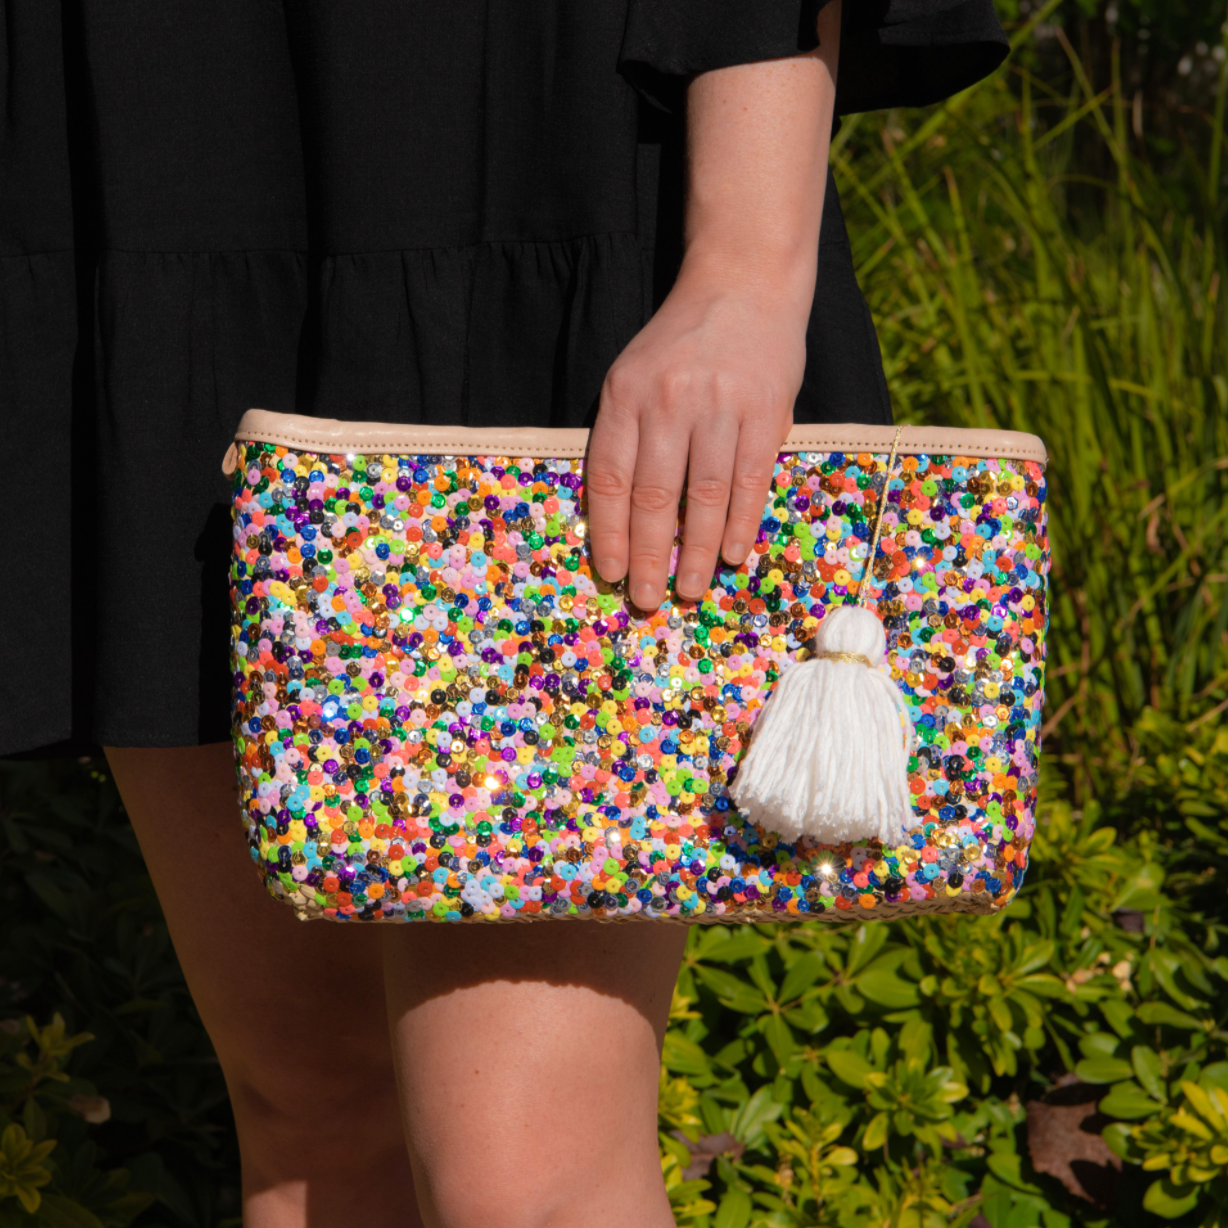 Girl holding straw clutch with multi-colored sequins